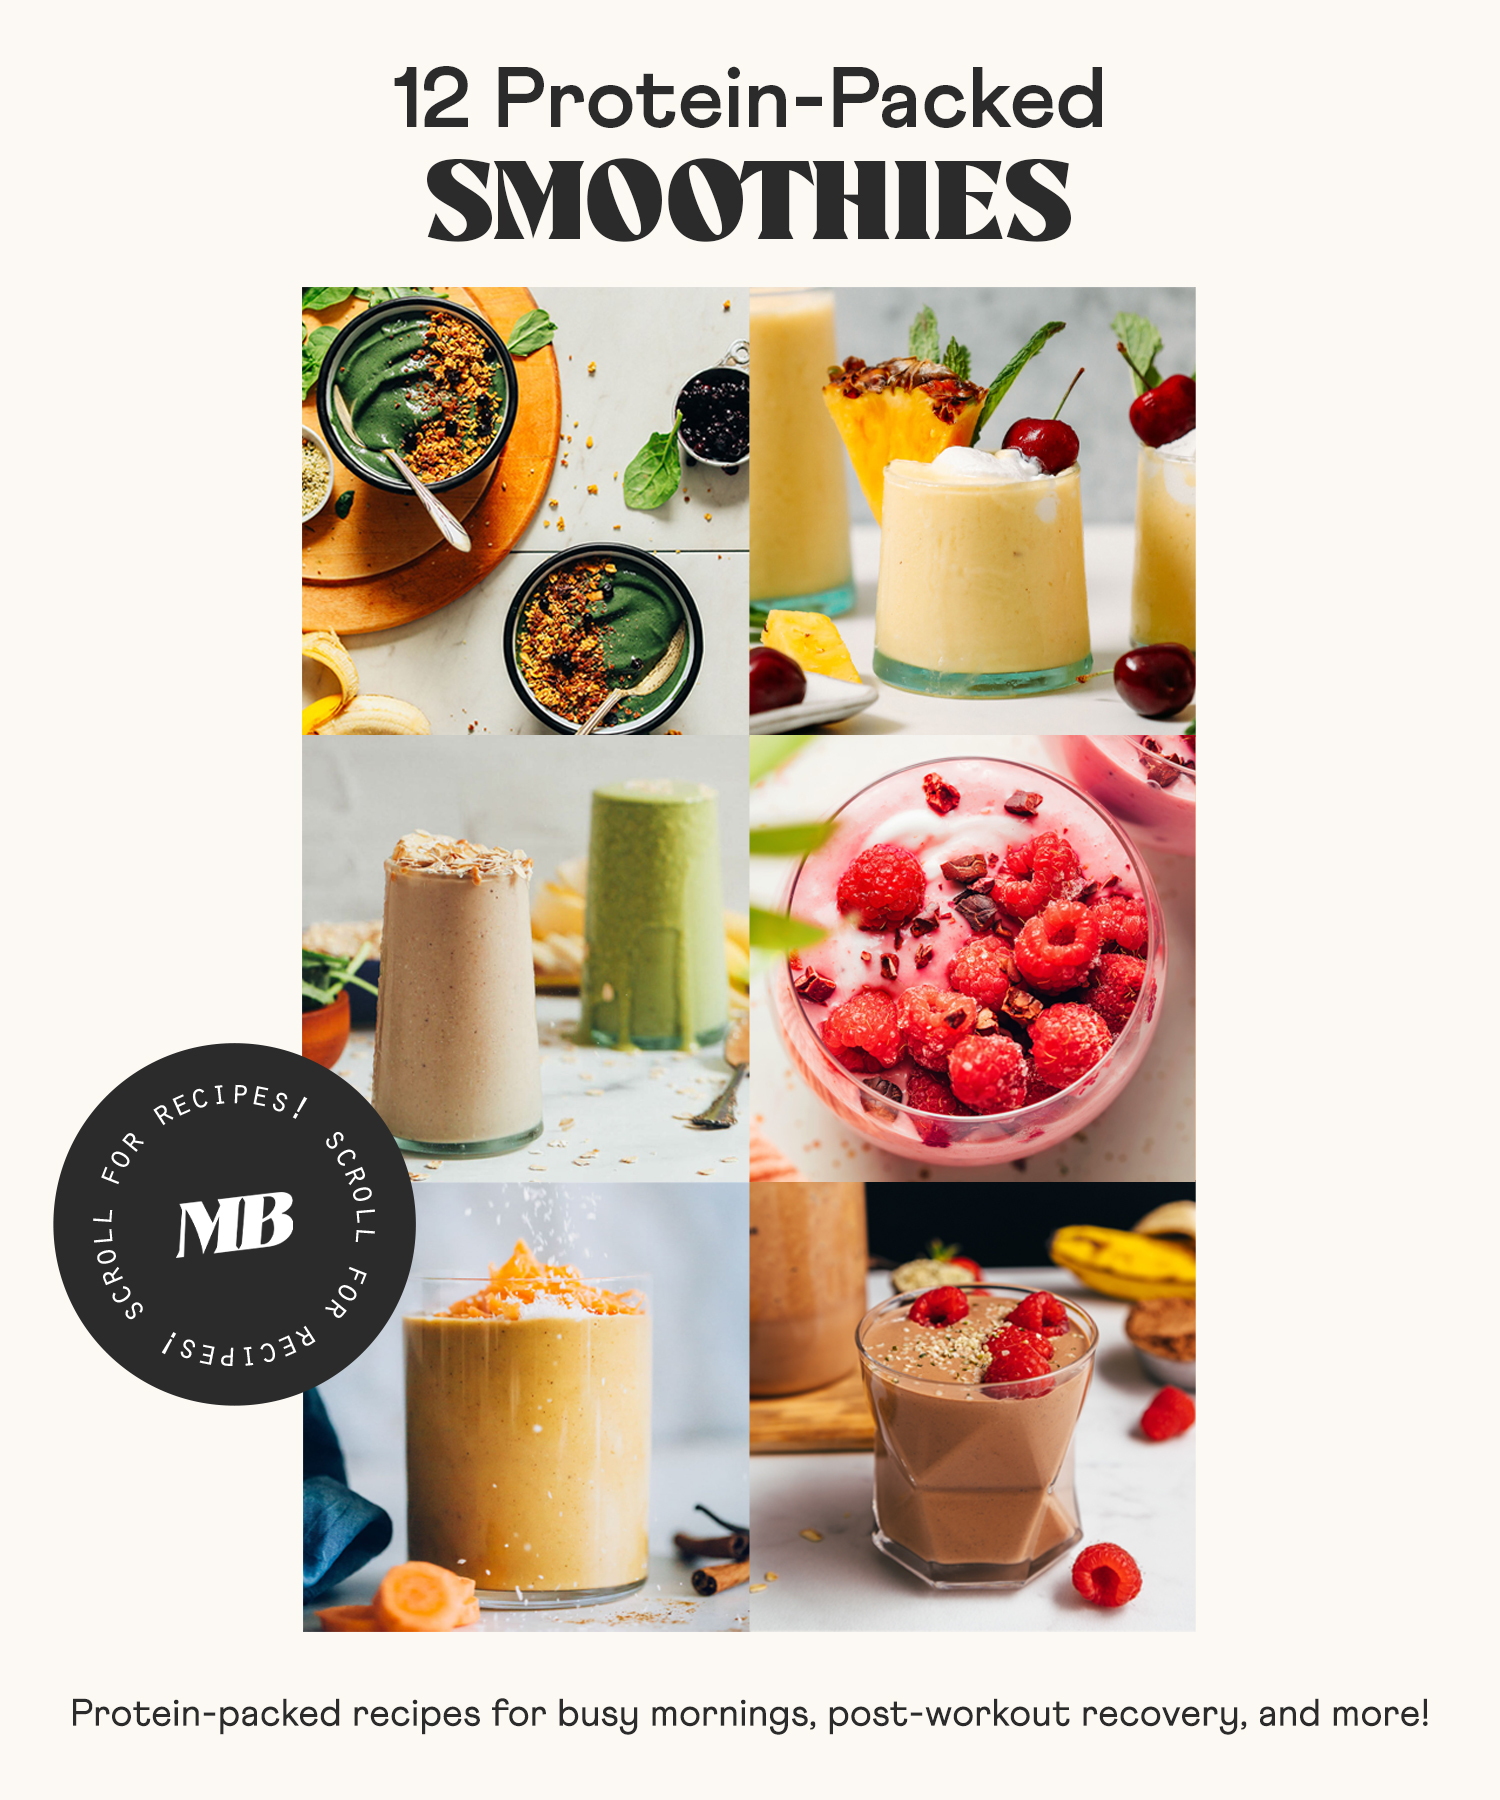 Photos of smoothies with text below them that reads "Protein-packed smoothie recipes for busy mornings, post-workout recovery, and more"